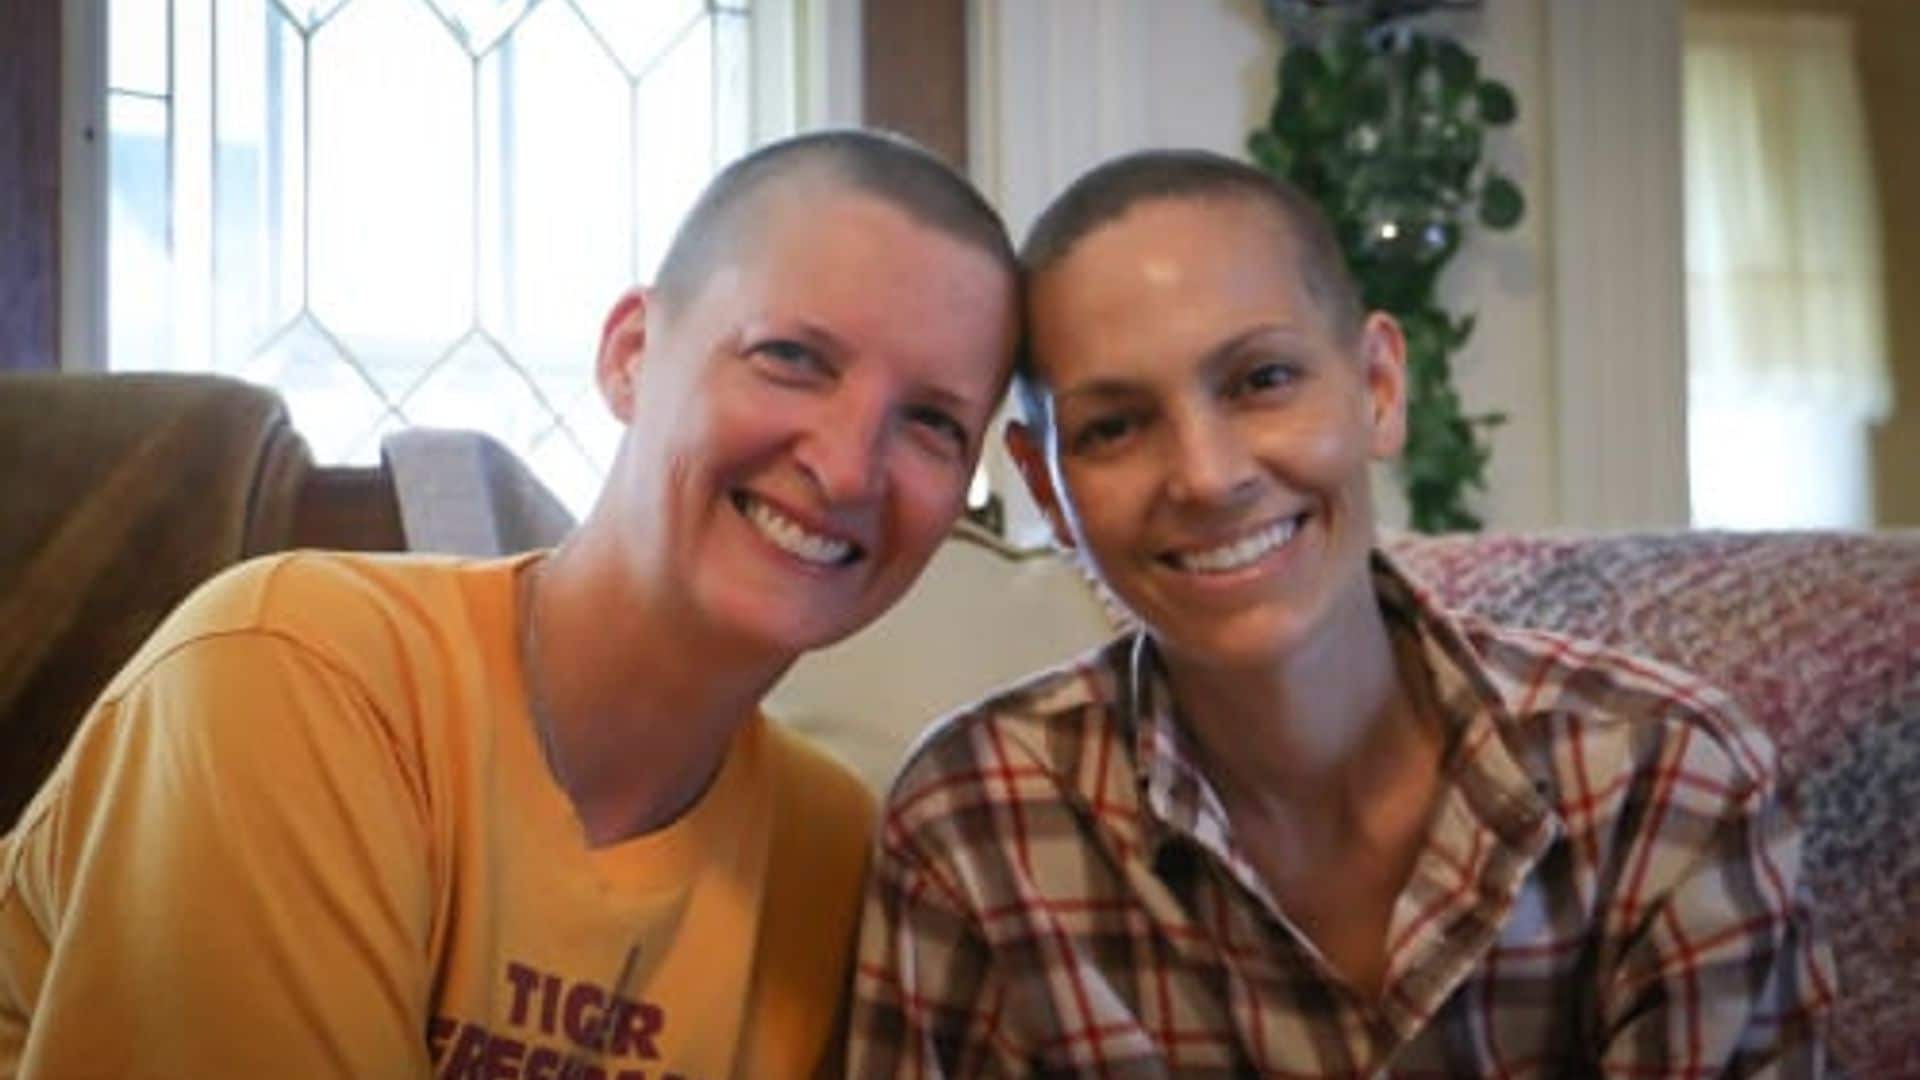 Joey Feek 'inconsolable' as she says goodbye to her best friend